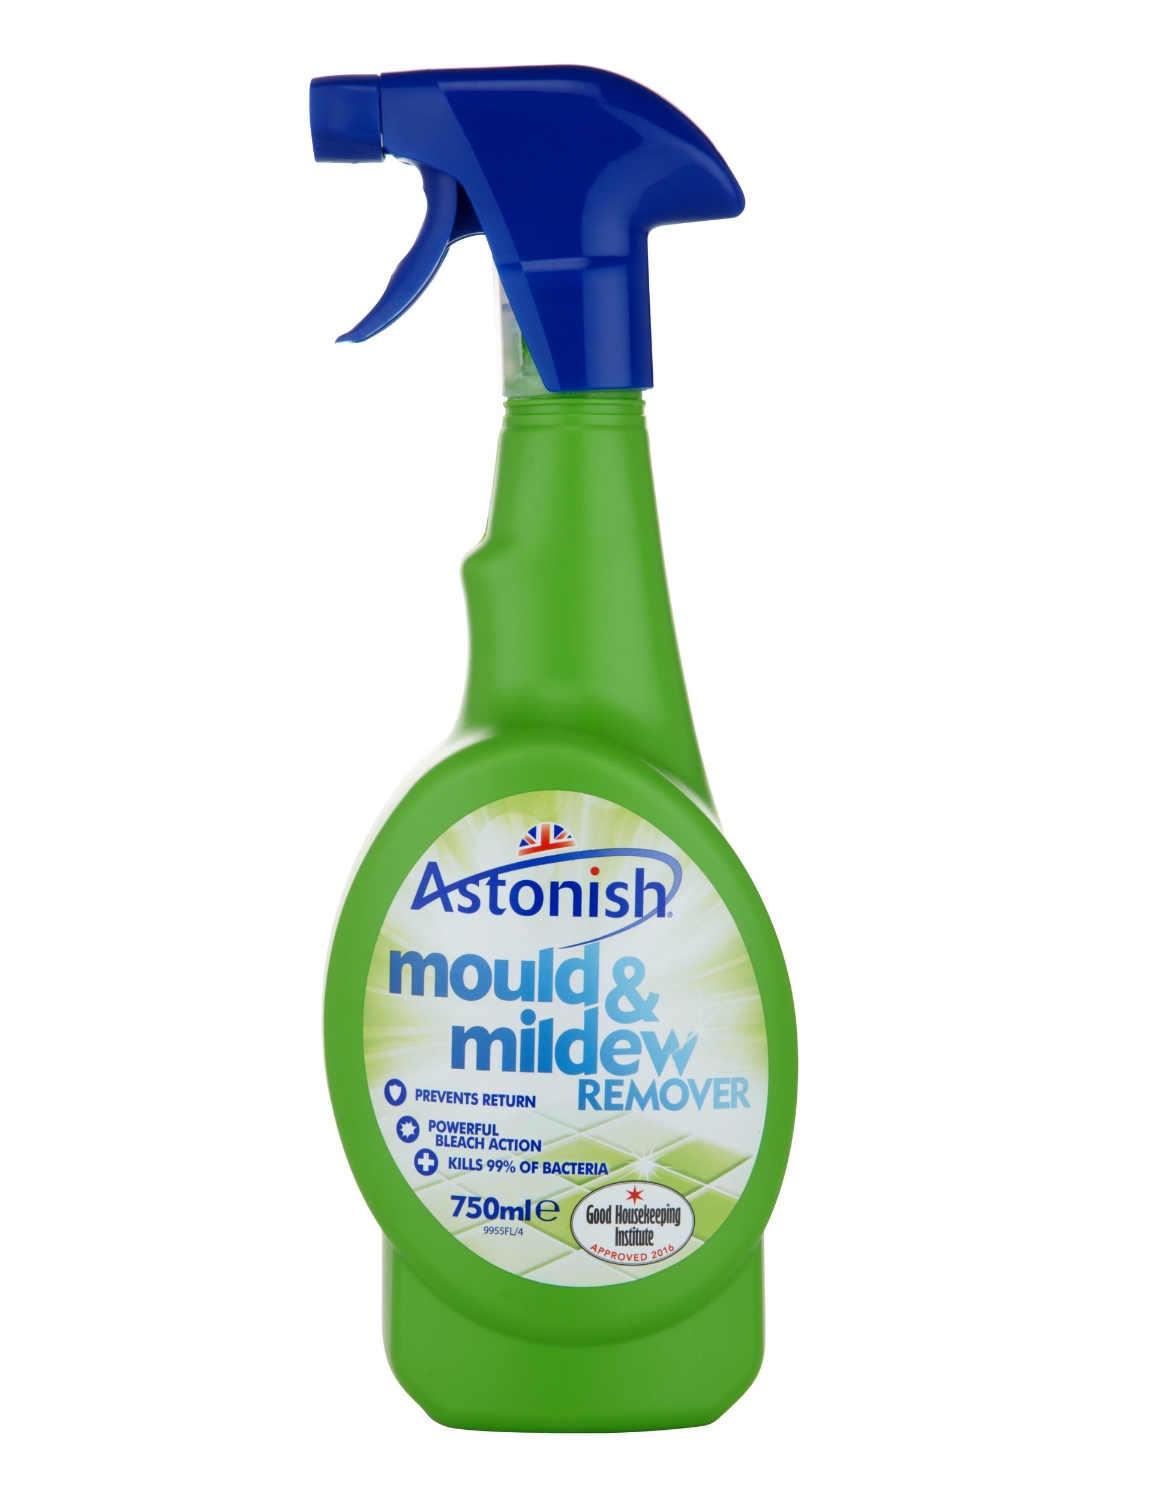 Astonish Mould & Mildew Remover with GHI logo 750ml.jpg